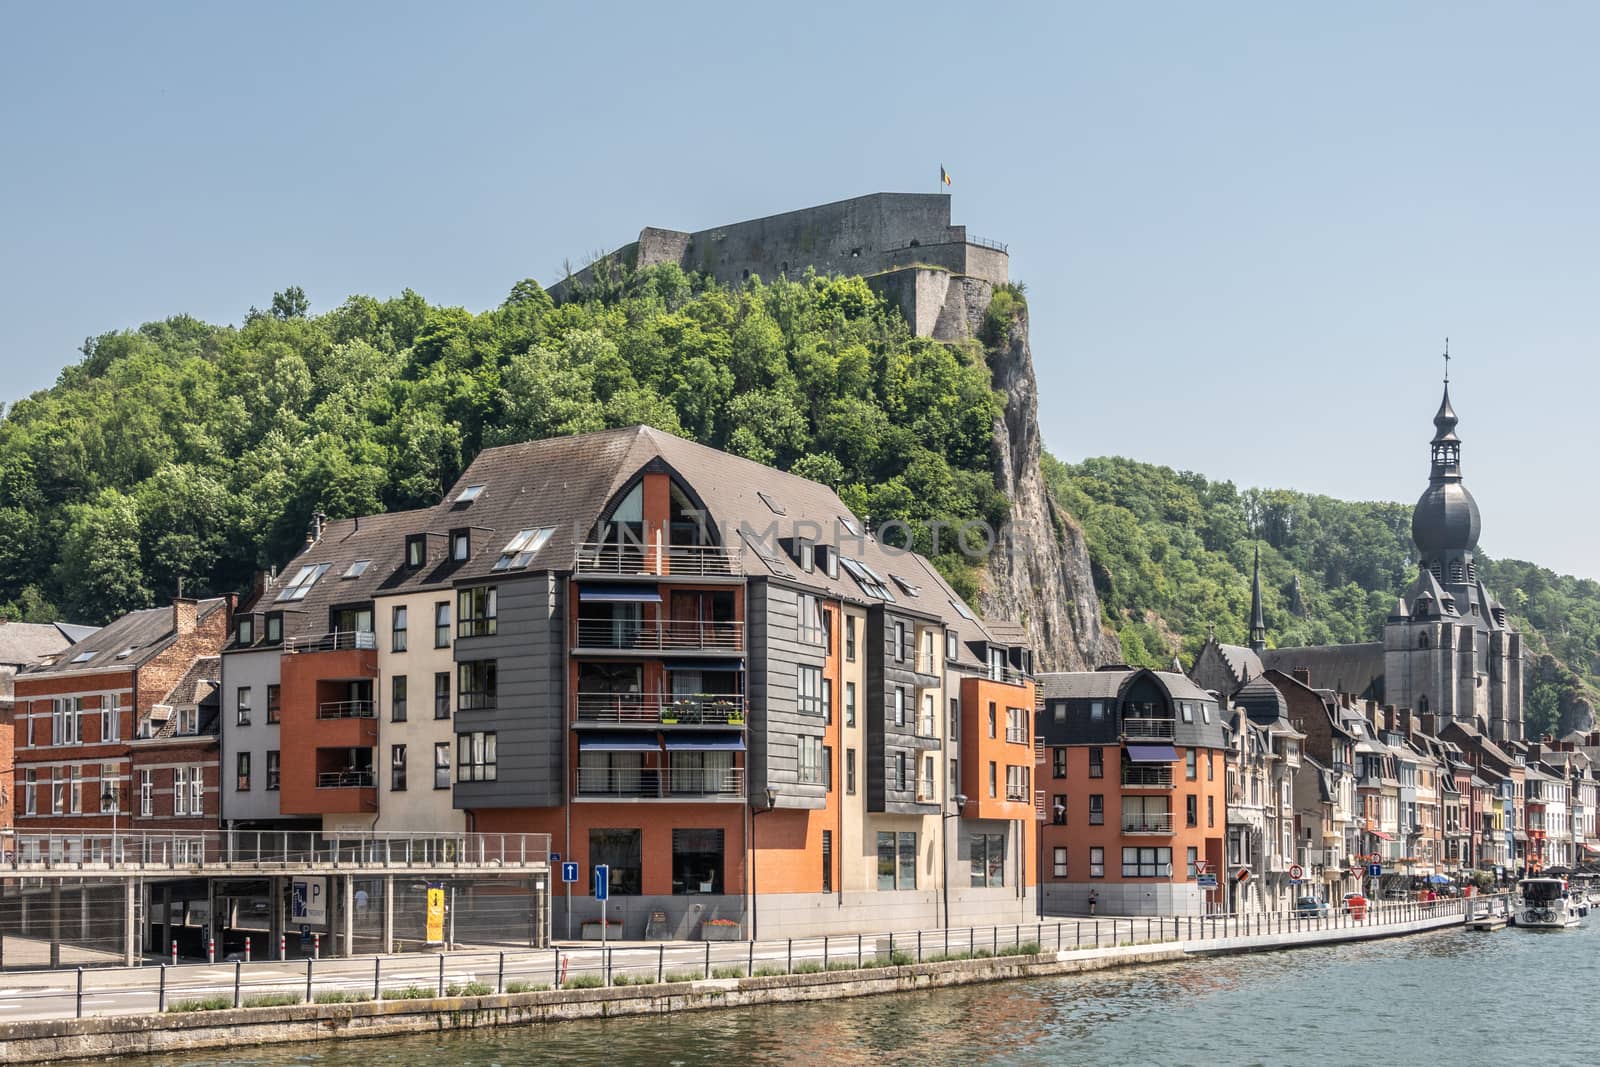 Dinant, Belgium - June 26, 2019: Citadelle fortification seen from right north bank of Meuse River with church and buildings, cars, boats under blue sky. Green foliage.